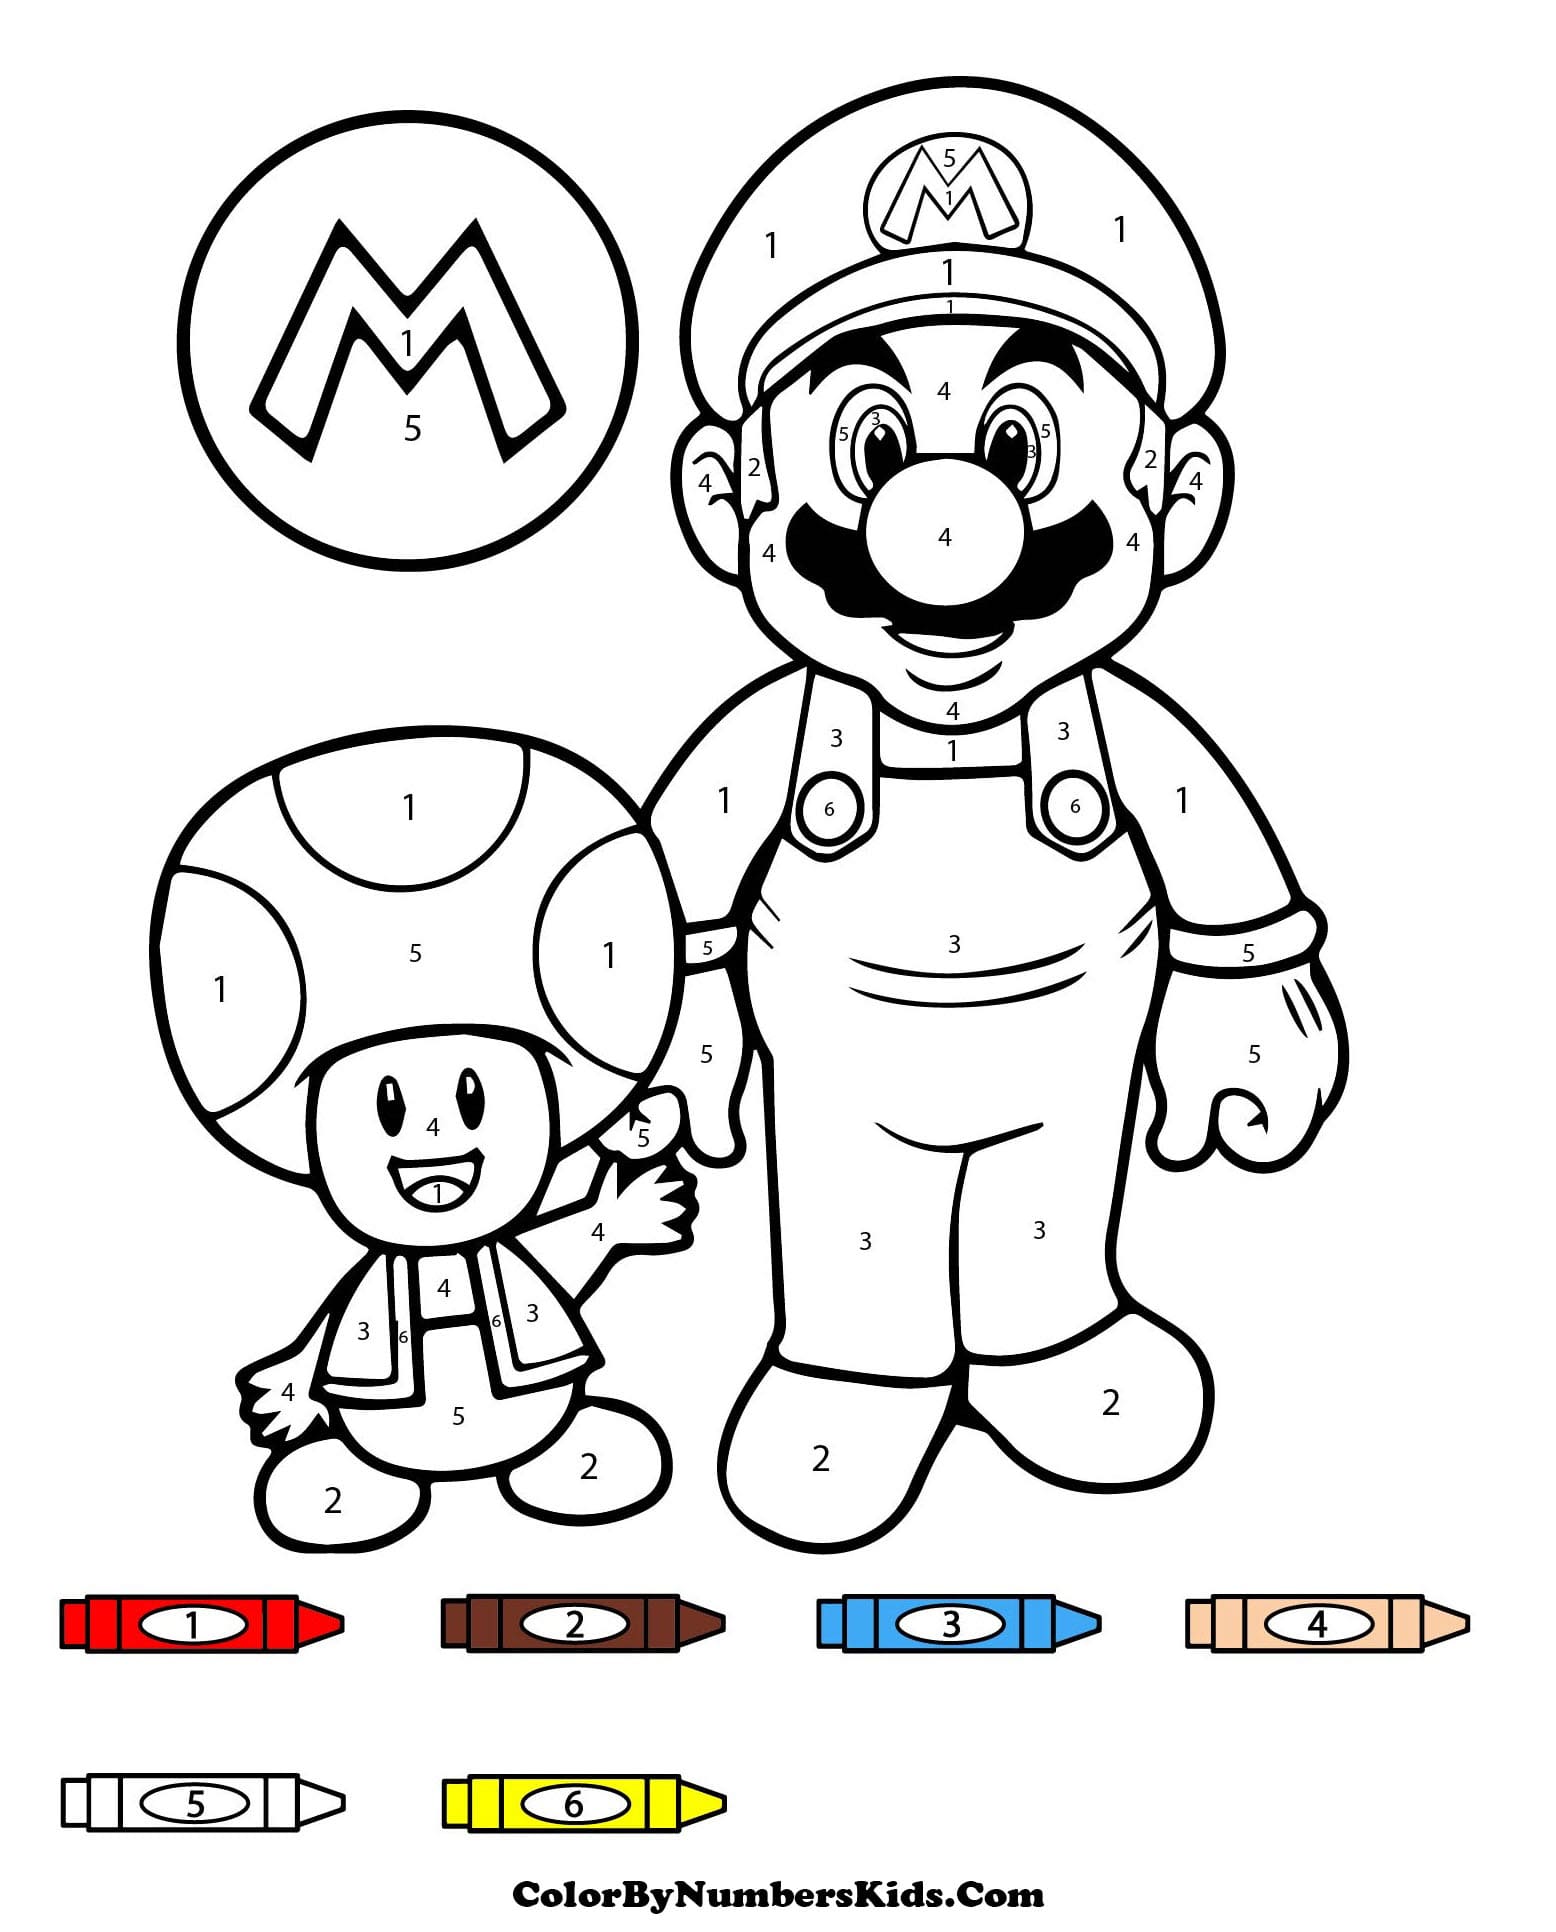 Toad and Mario Color By Number